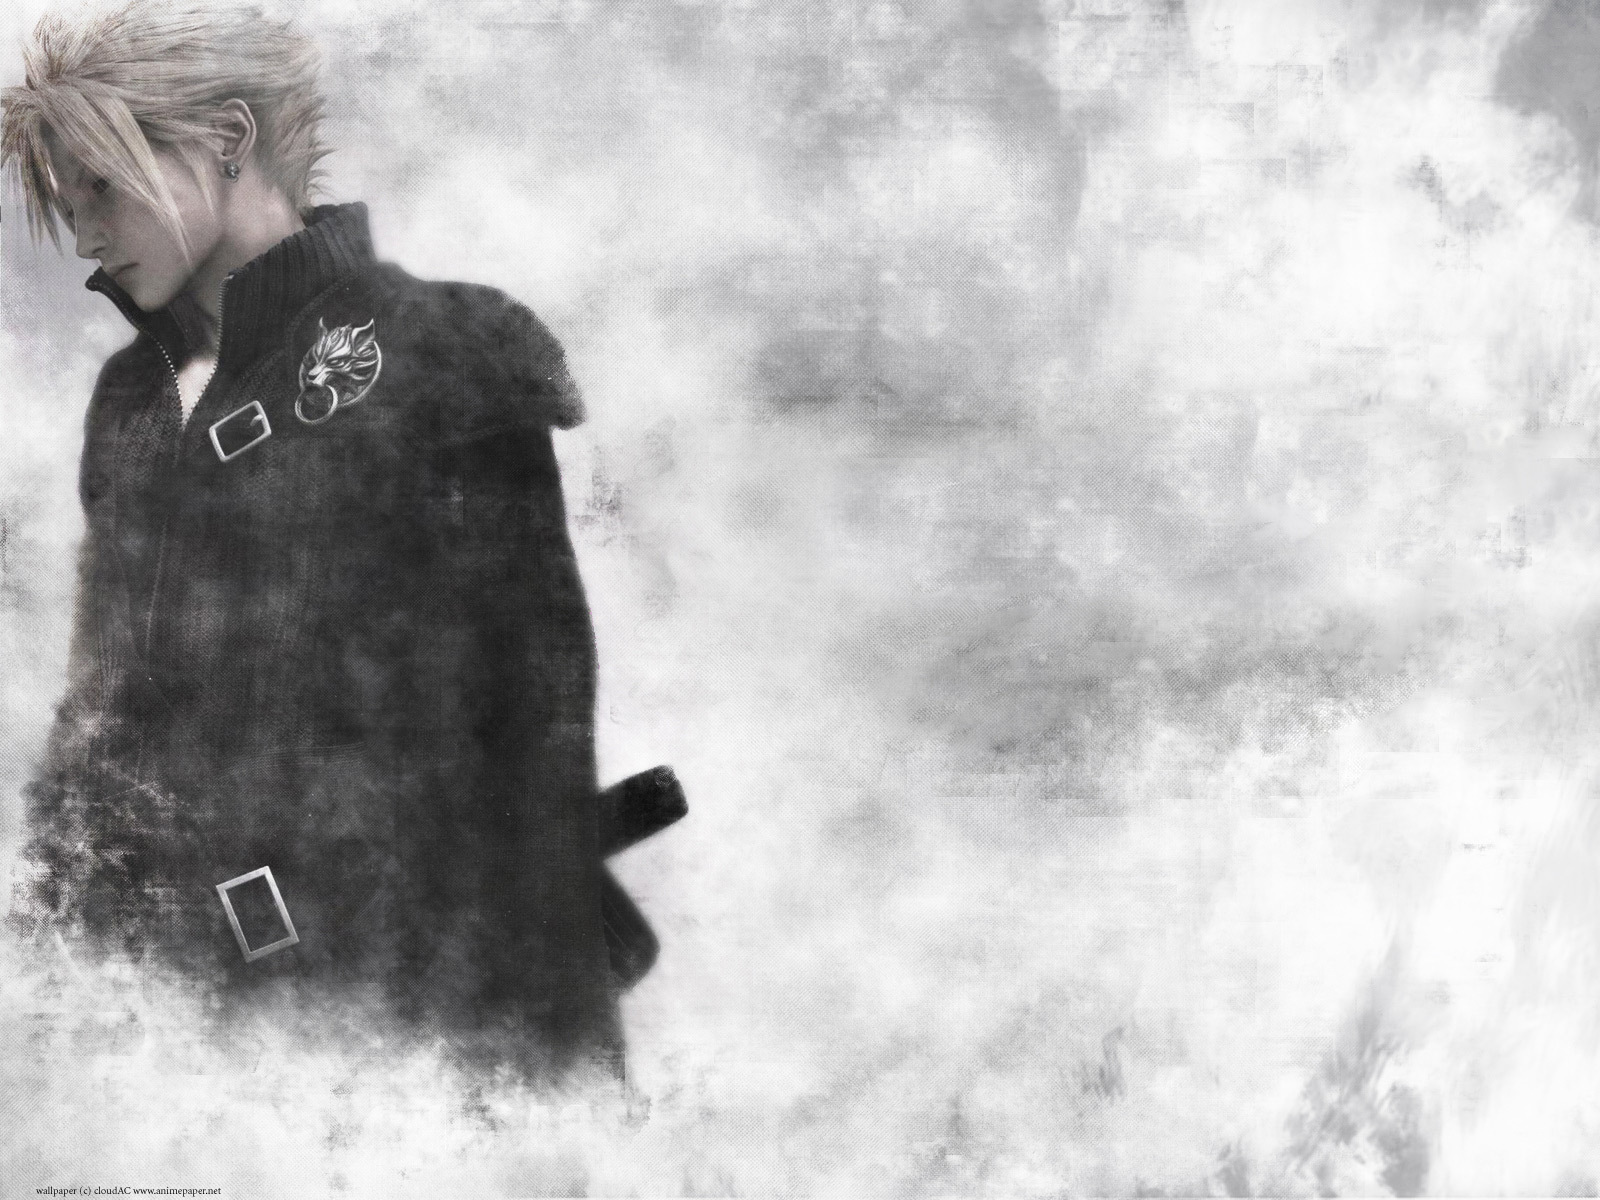 Cloud Strife Image Final Fantasy HD Wallpaper And Background Photos